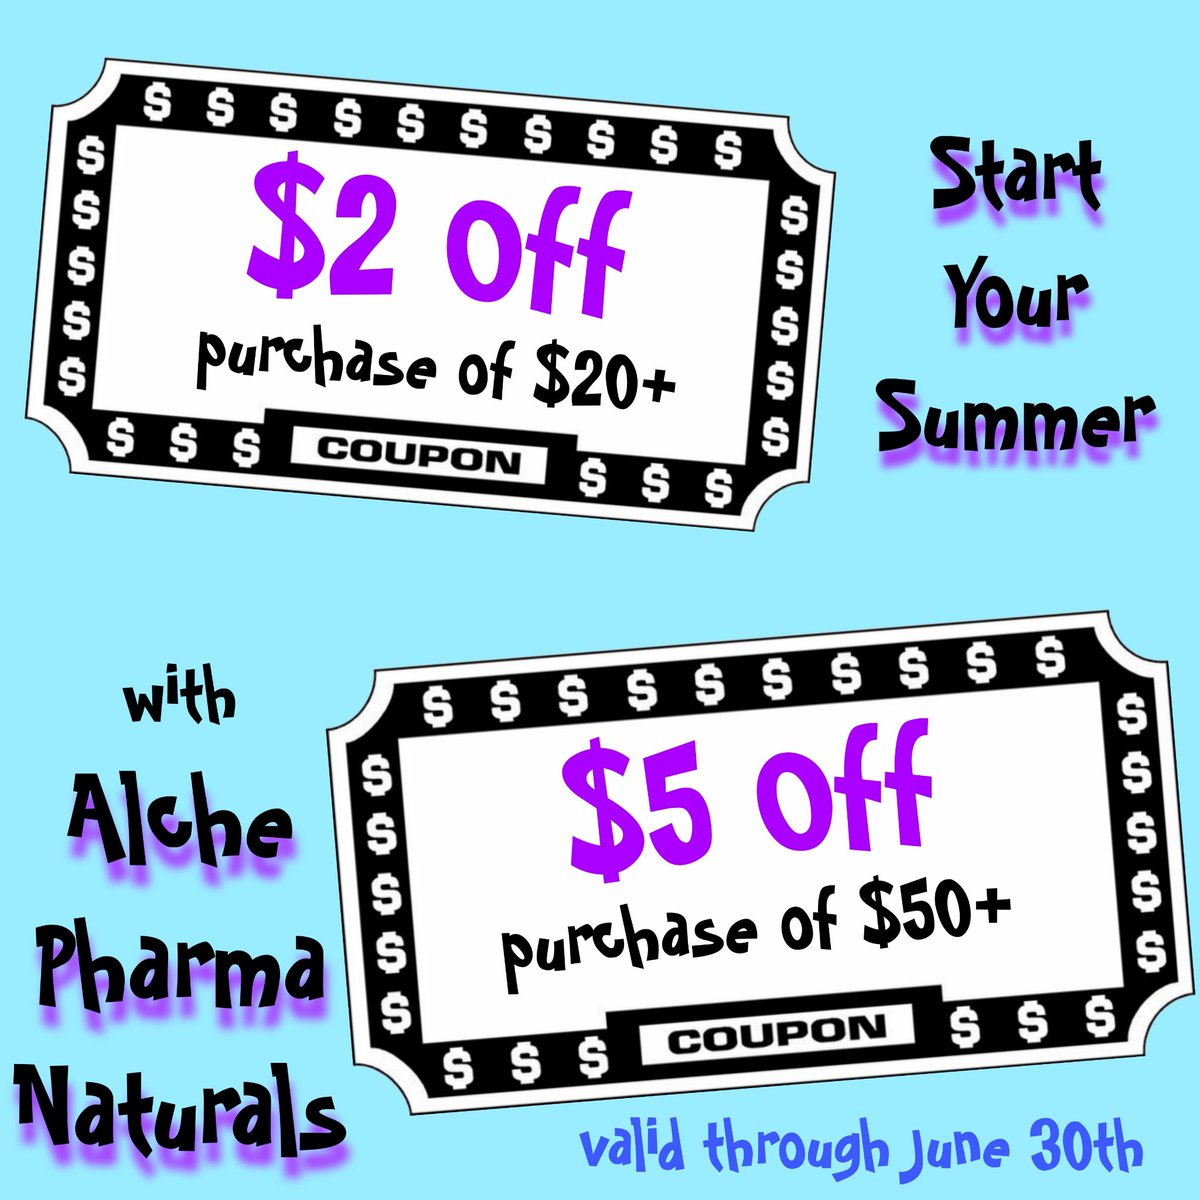 Show this picture in any of our 3 #CentralCoast stores from now through the end of June to get $2 or $5 off your total purchase!

We have #supplements #sportsnutrition #snacks #drinks #bodycare #gifts and so so much more!

 #vitaminstore #healthfoodstore #Community #CentralCoast